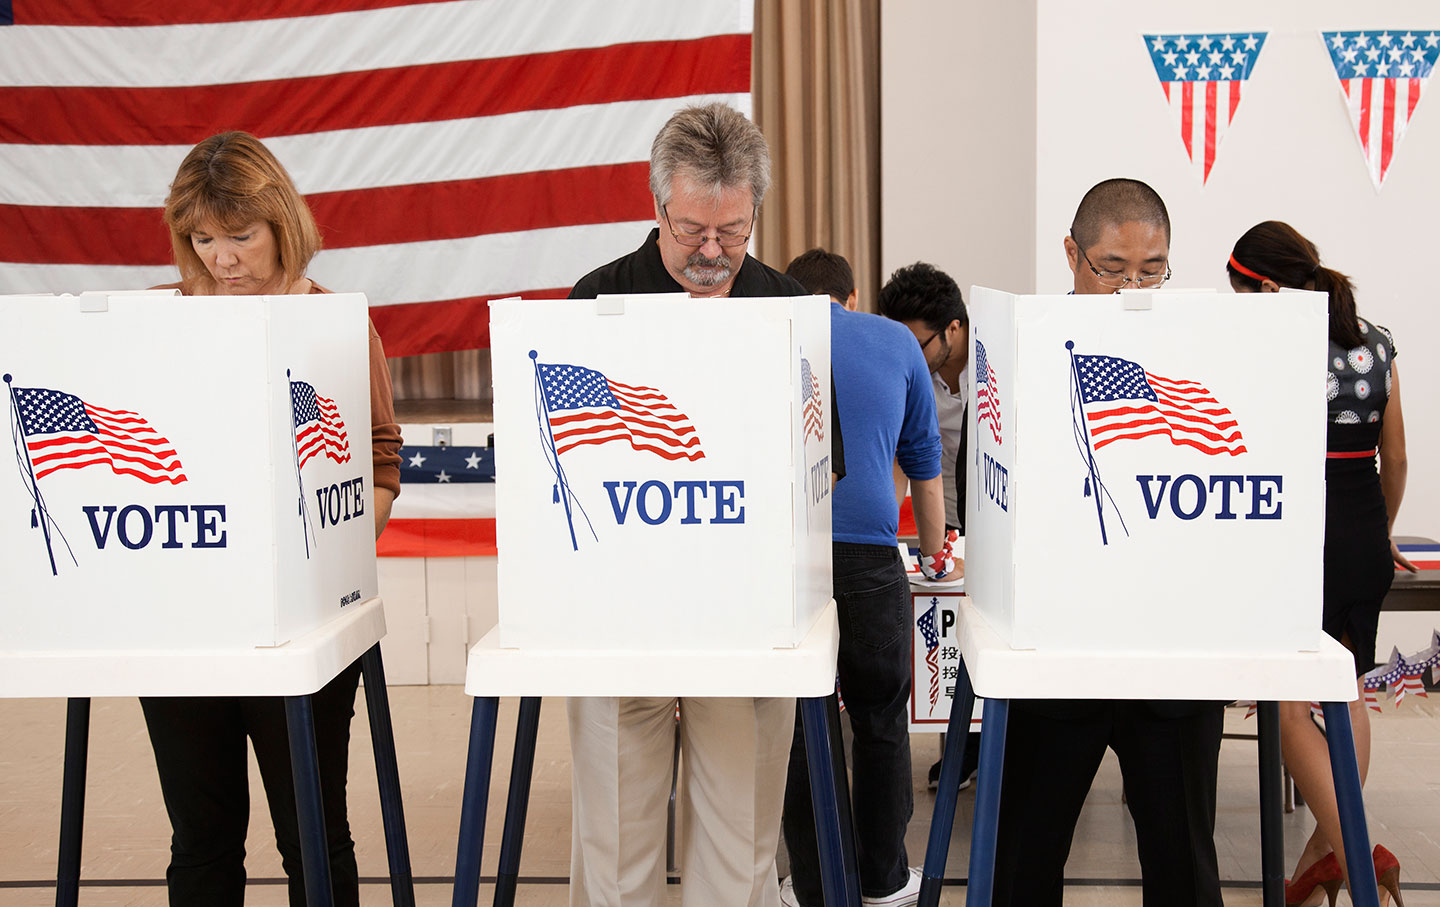 Voters at a polling place